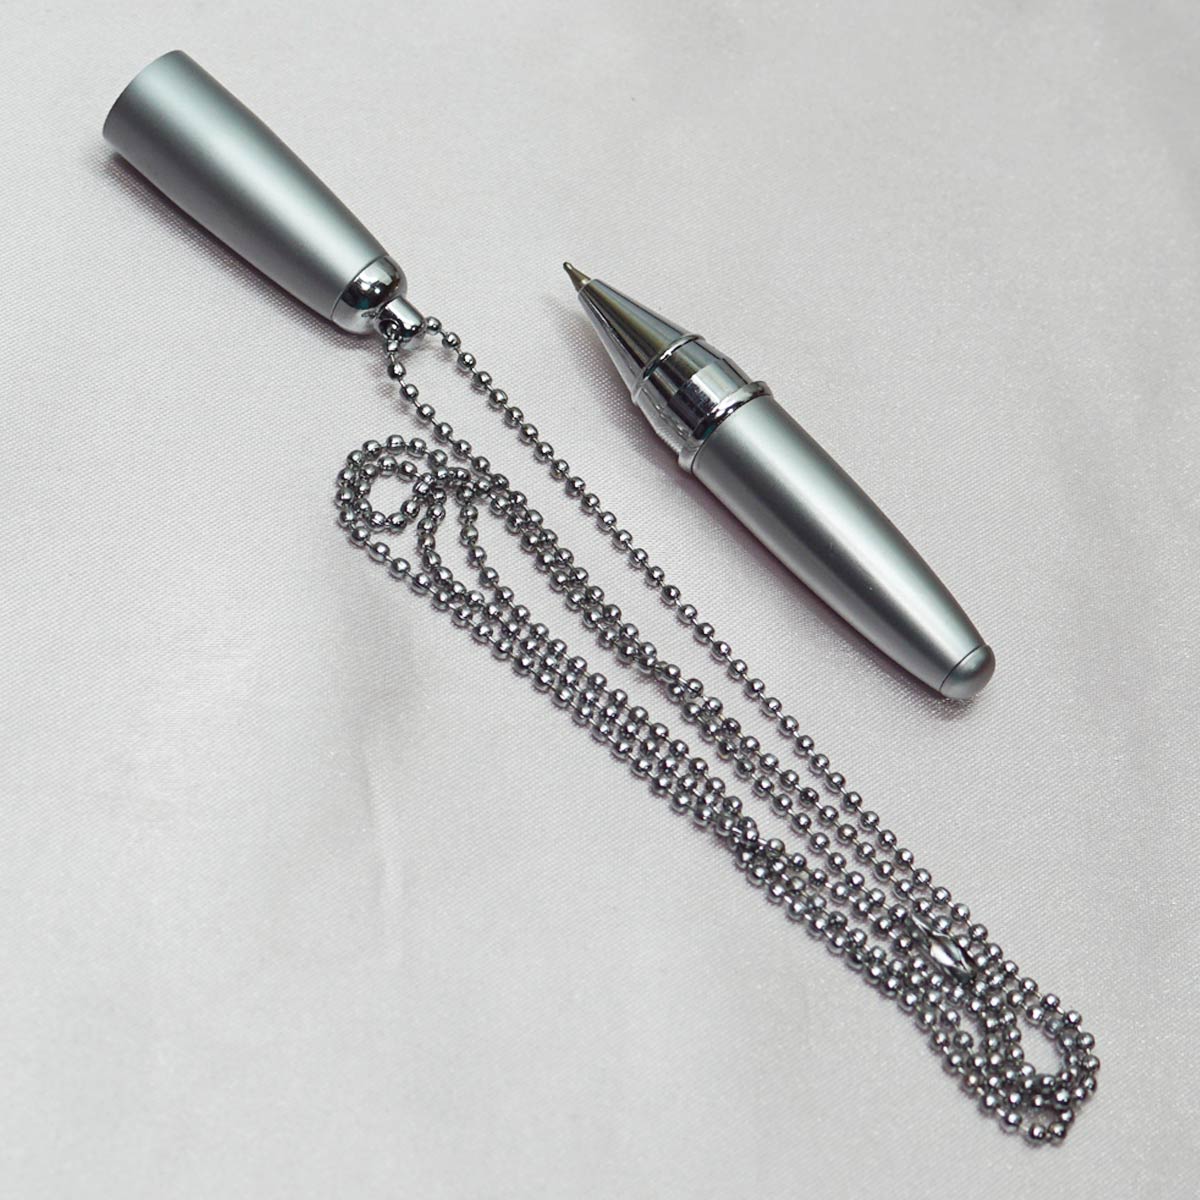 Submarine Short Full Silver Body and Cap With Chain On Clip Fine Tip Cap Type Ball Pen SKU 22582